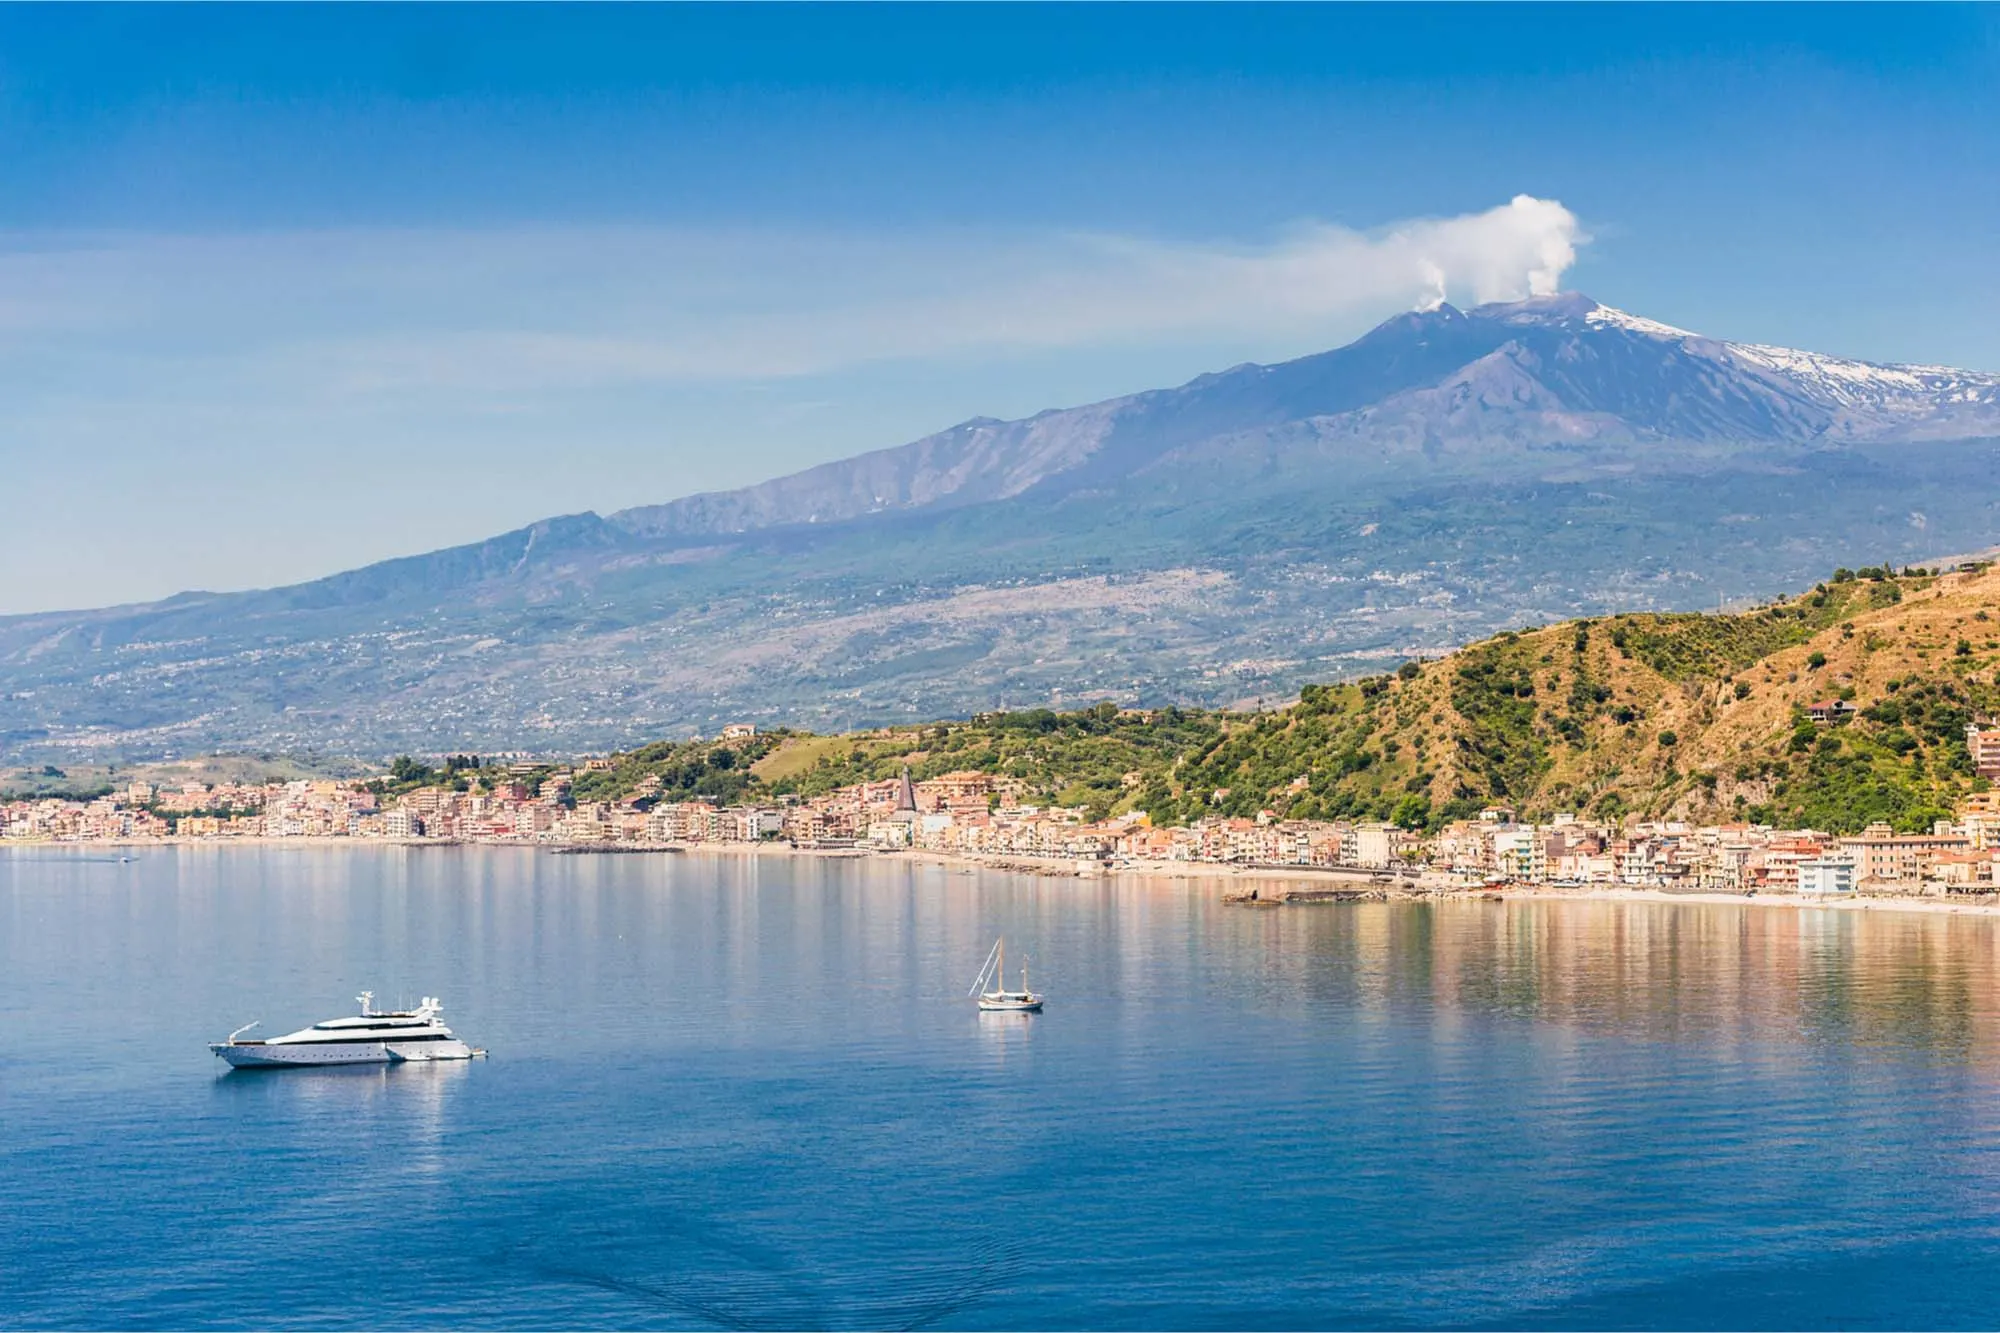 Mount Etna towering near the coast and ocean